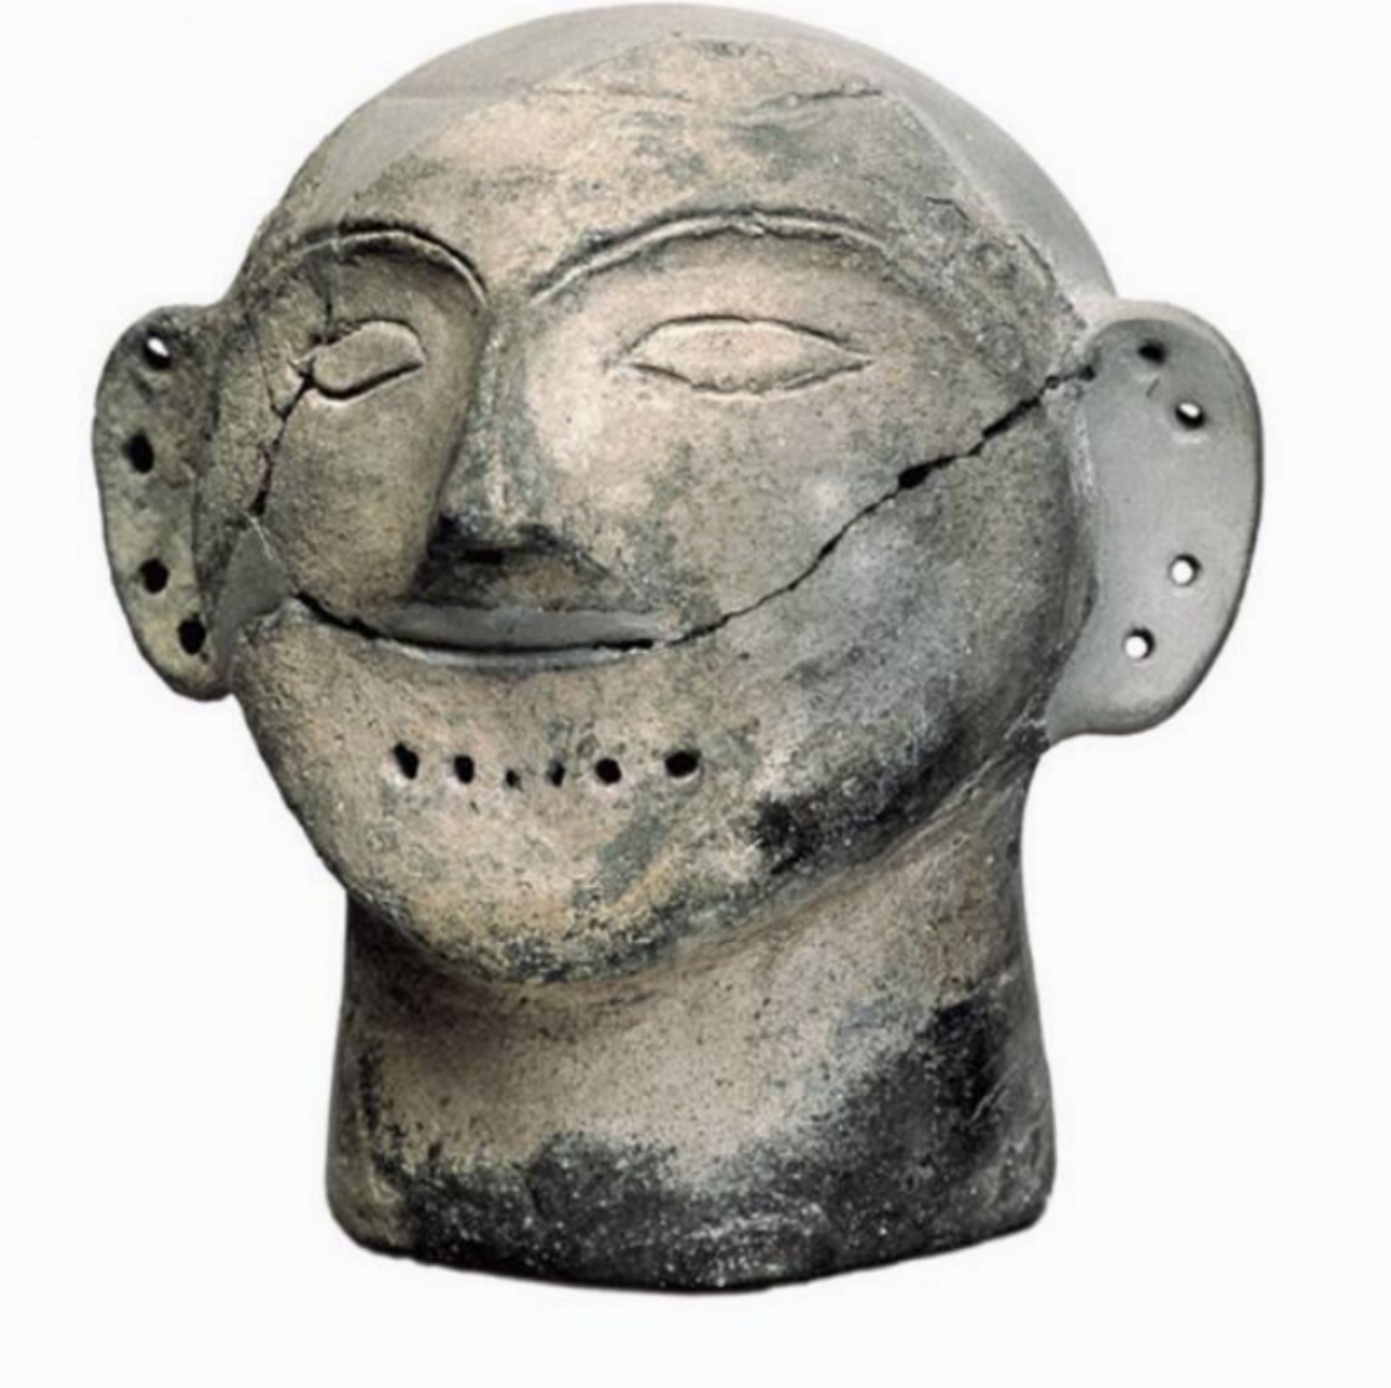 Clay anthropomorphic head, Late Chalcolithic period, 4500-4000 BCE, Hamangia Culture, found submerged in Varna Lake, Varna Archeology Museum